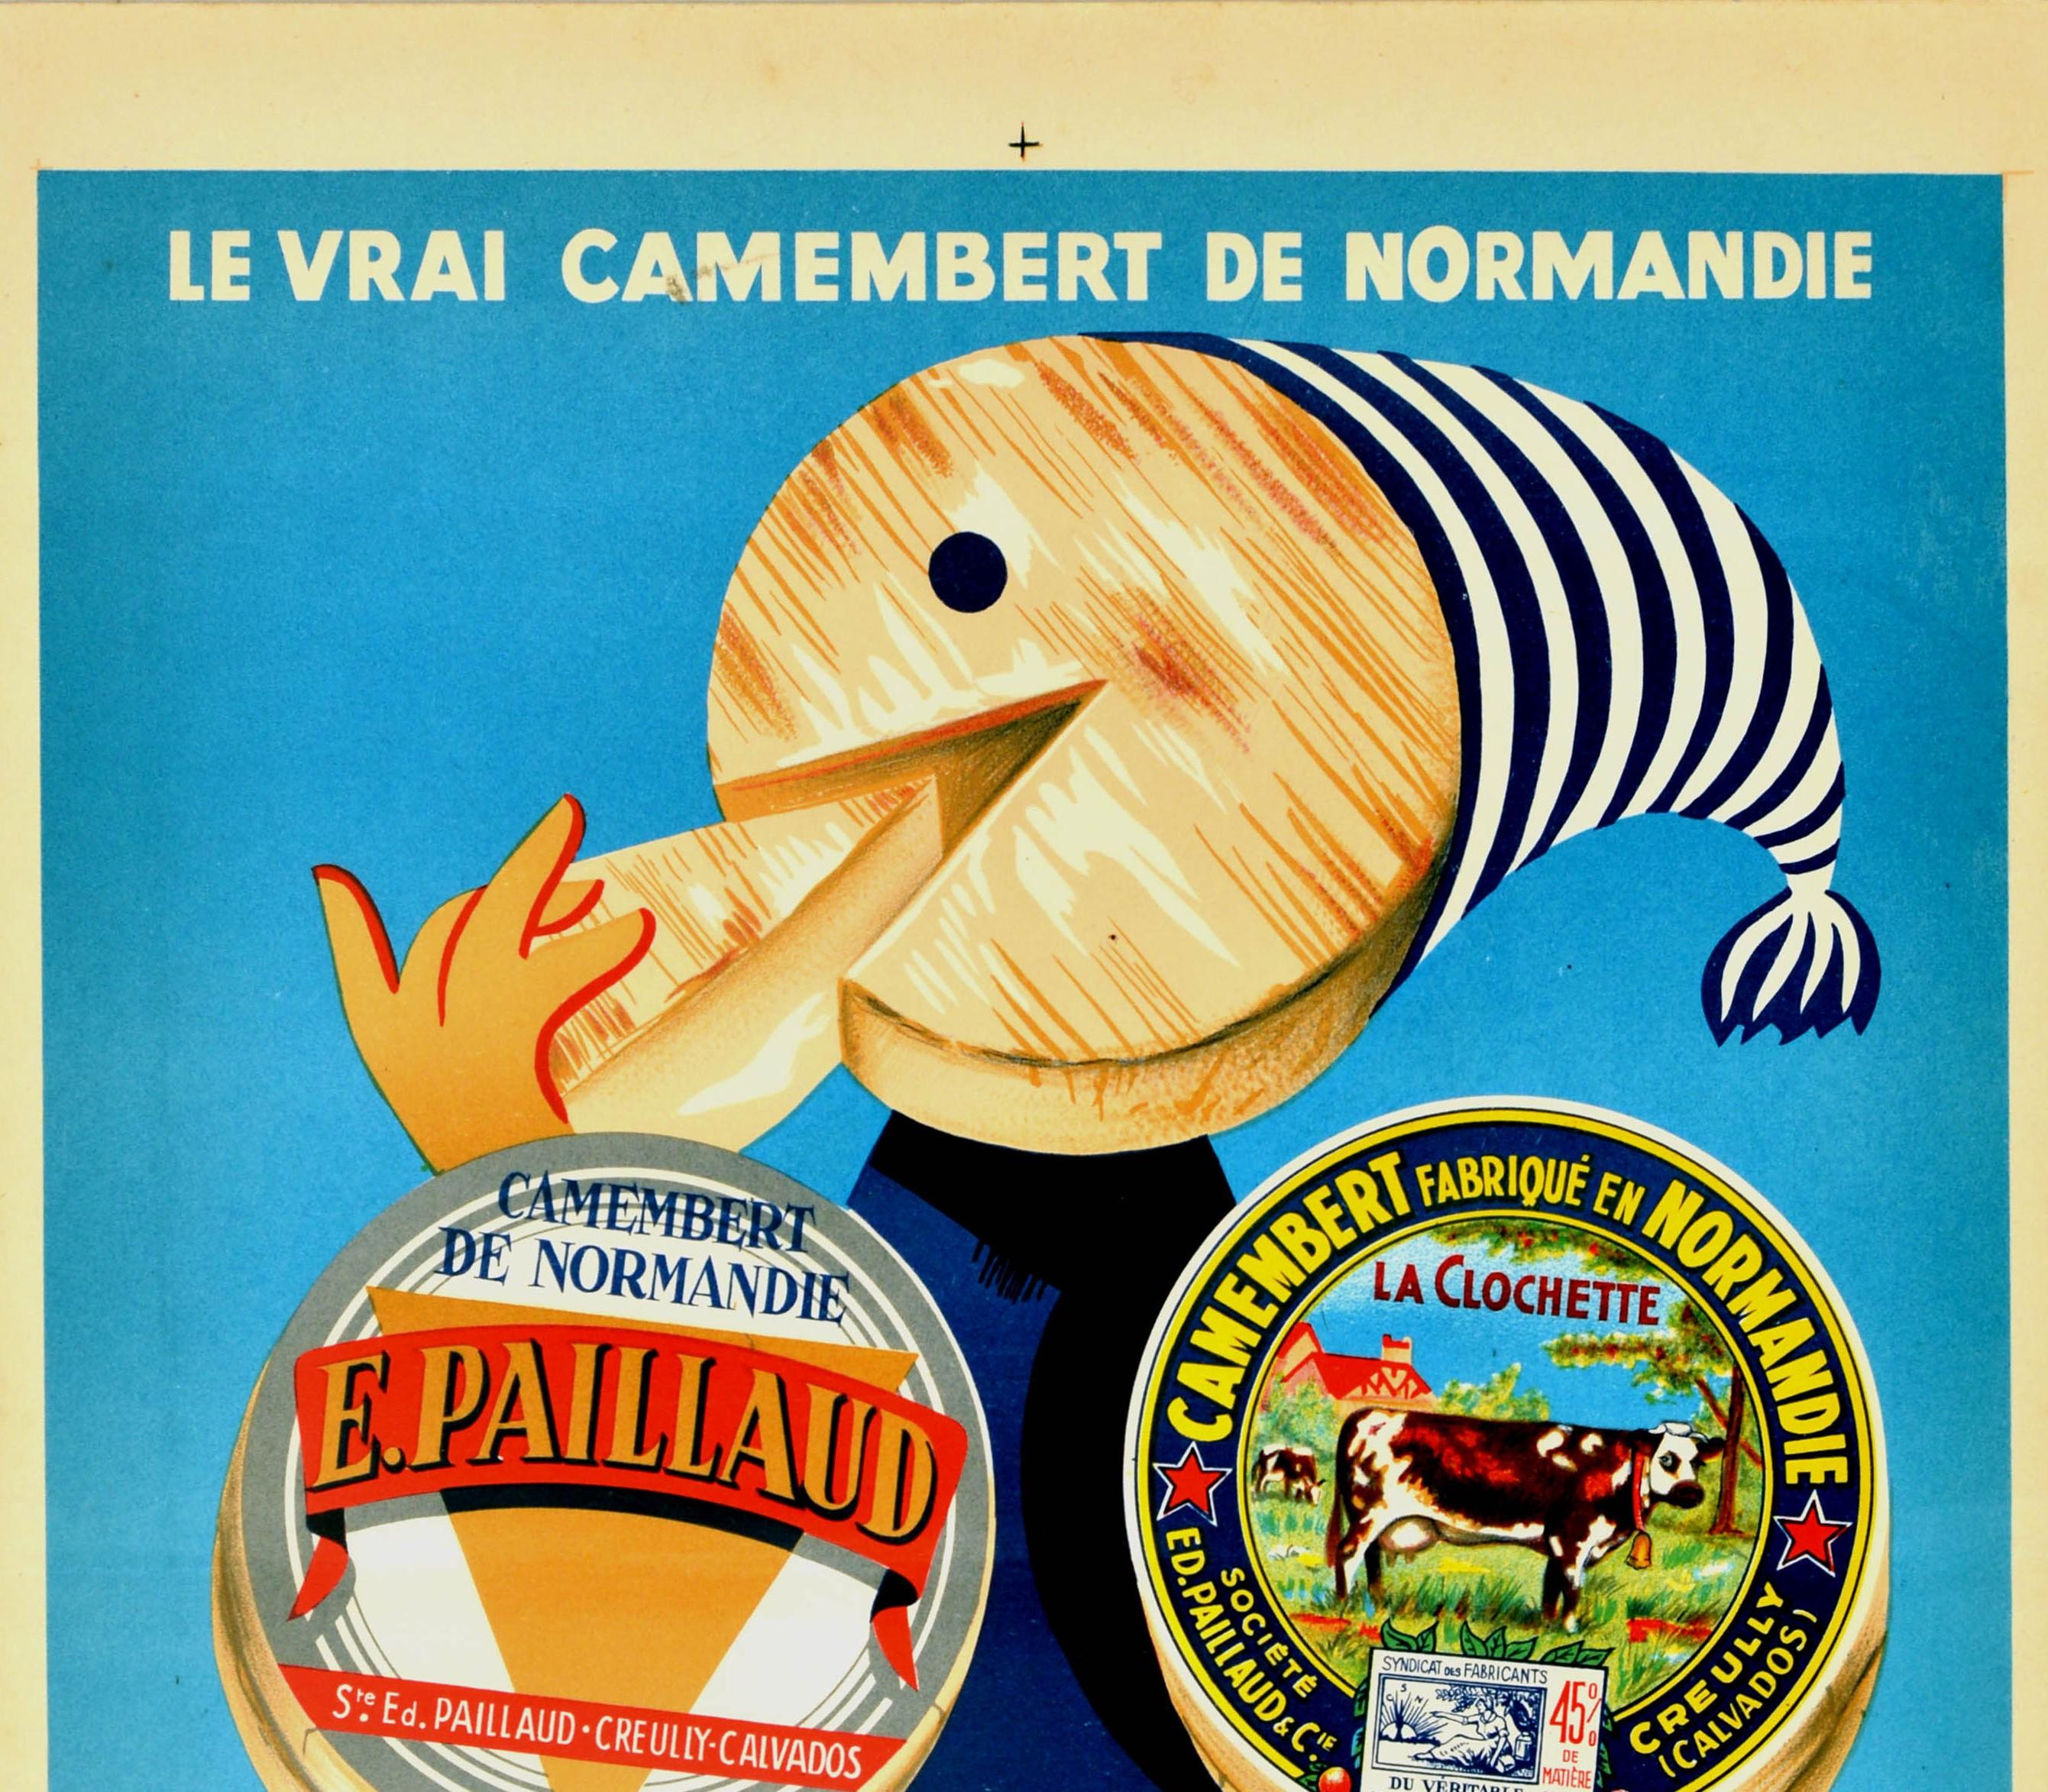 Original vintage food advertising poster for a French cheese - Le vrai camembert de Normandie E. Paillaud / The real camembert of Normandy E. Paillaud - featuring fun artwork of a smiling cartoon figure formed by a wheel of cheese as it's head